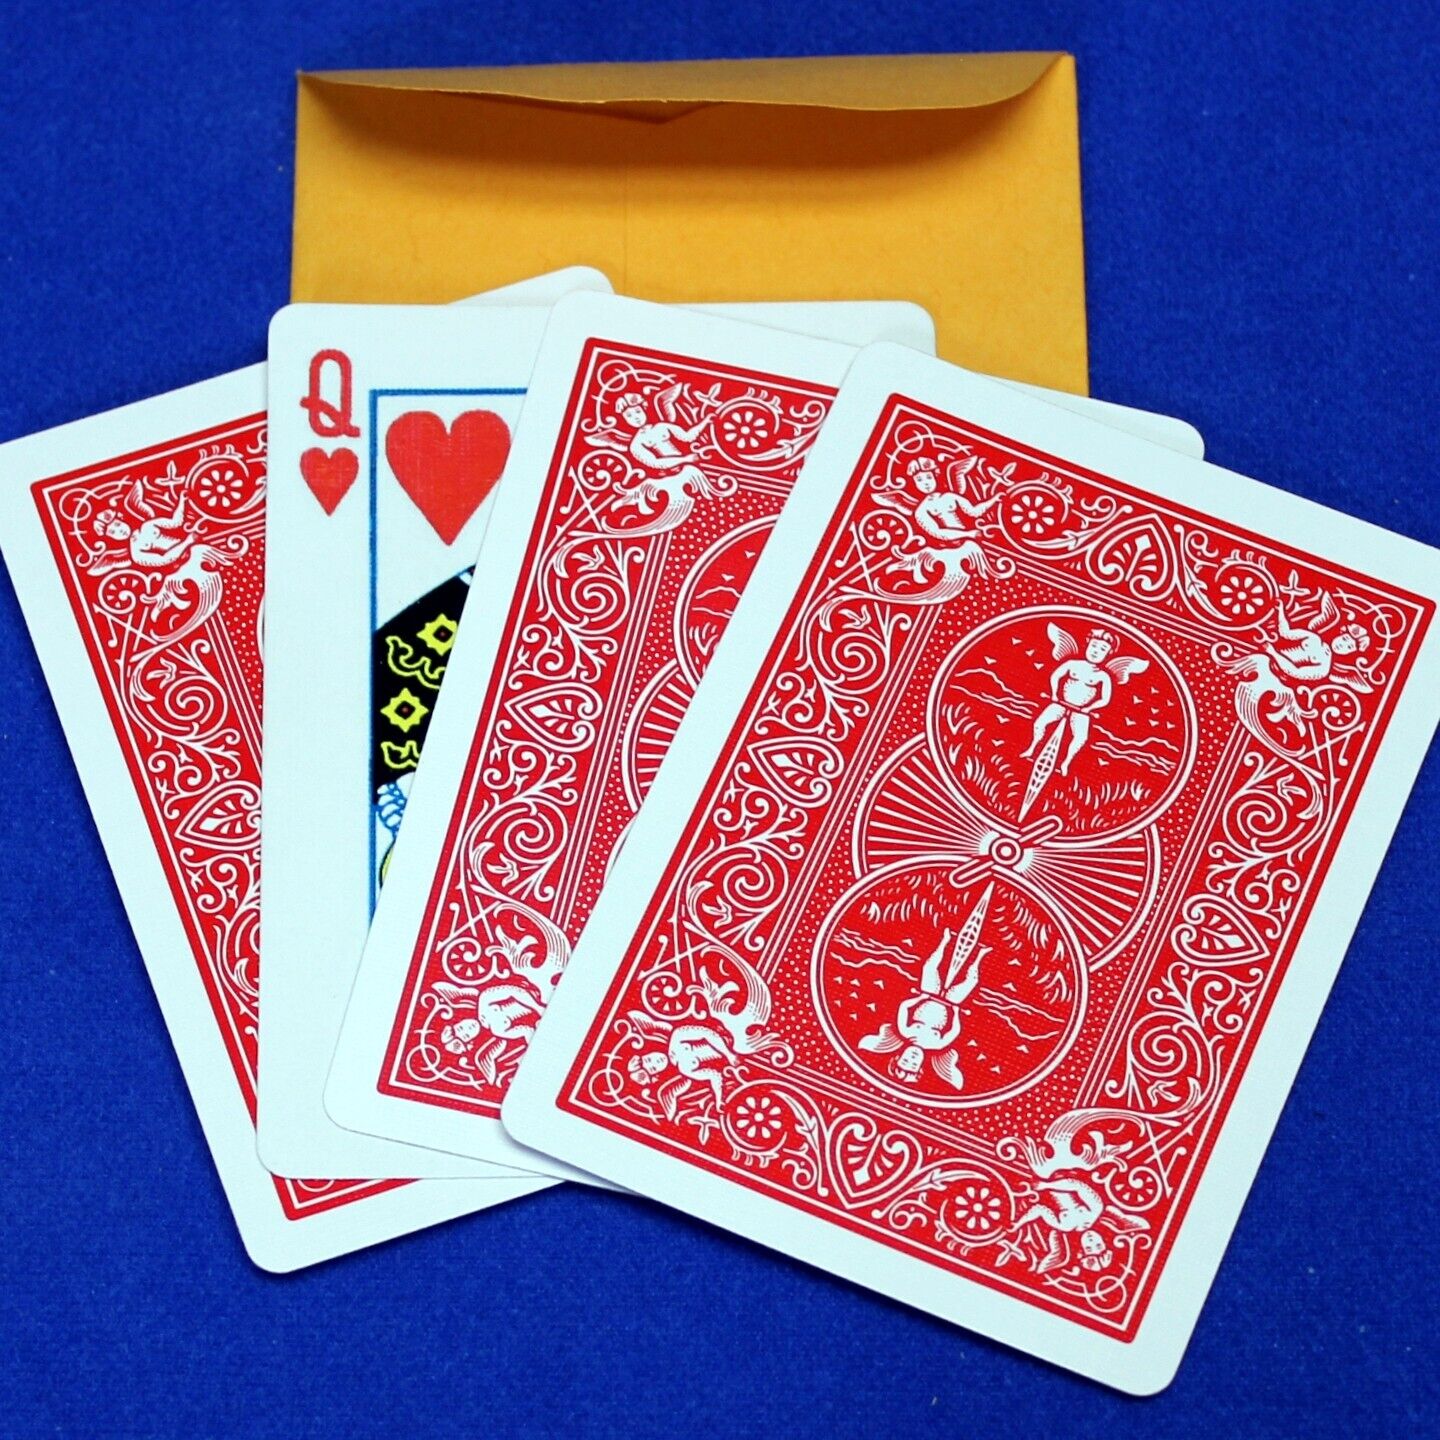 Parade of Four Queens - Packet Trick - Bicycle Card Magic - Dream Cards